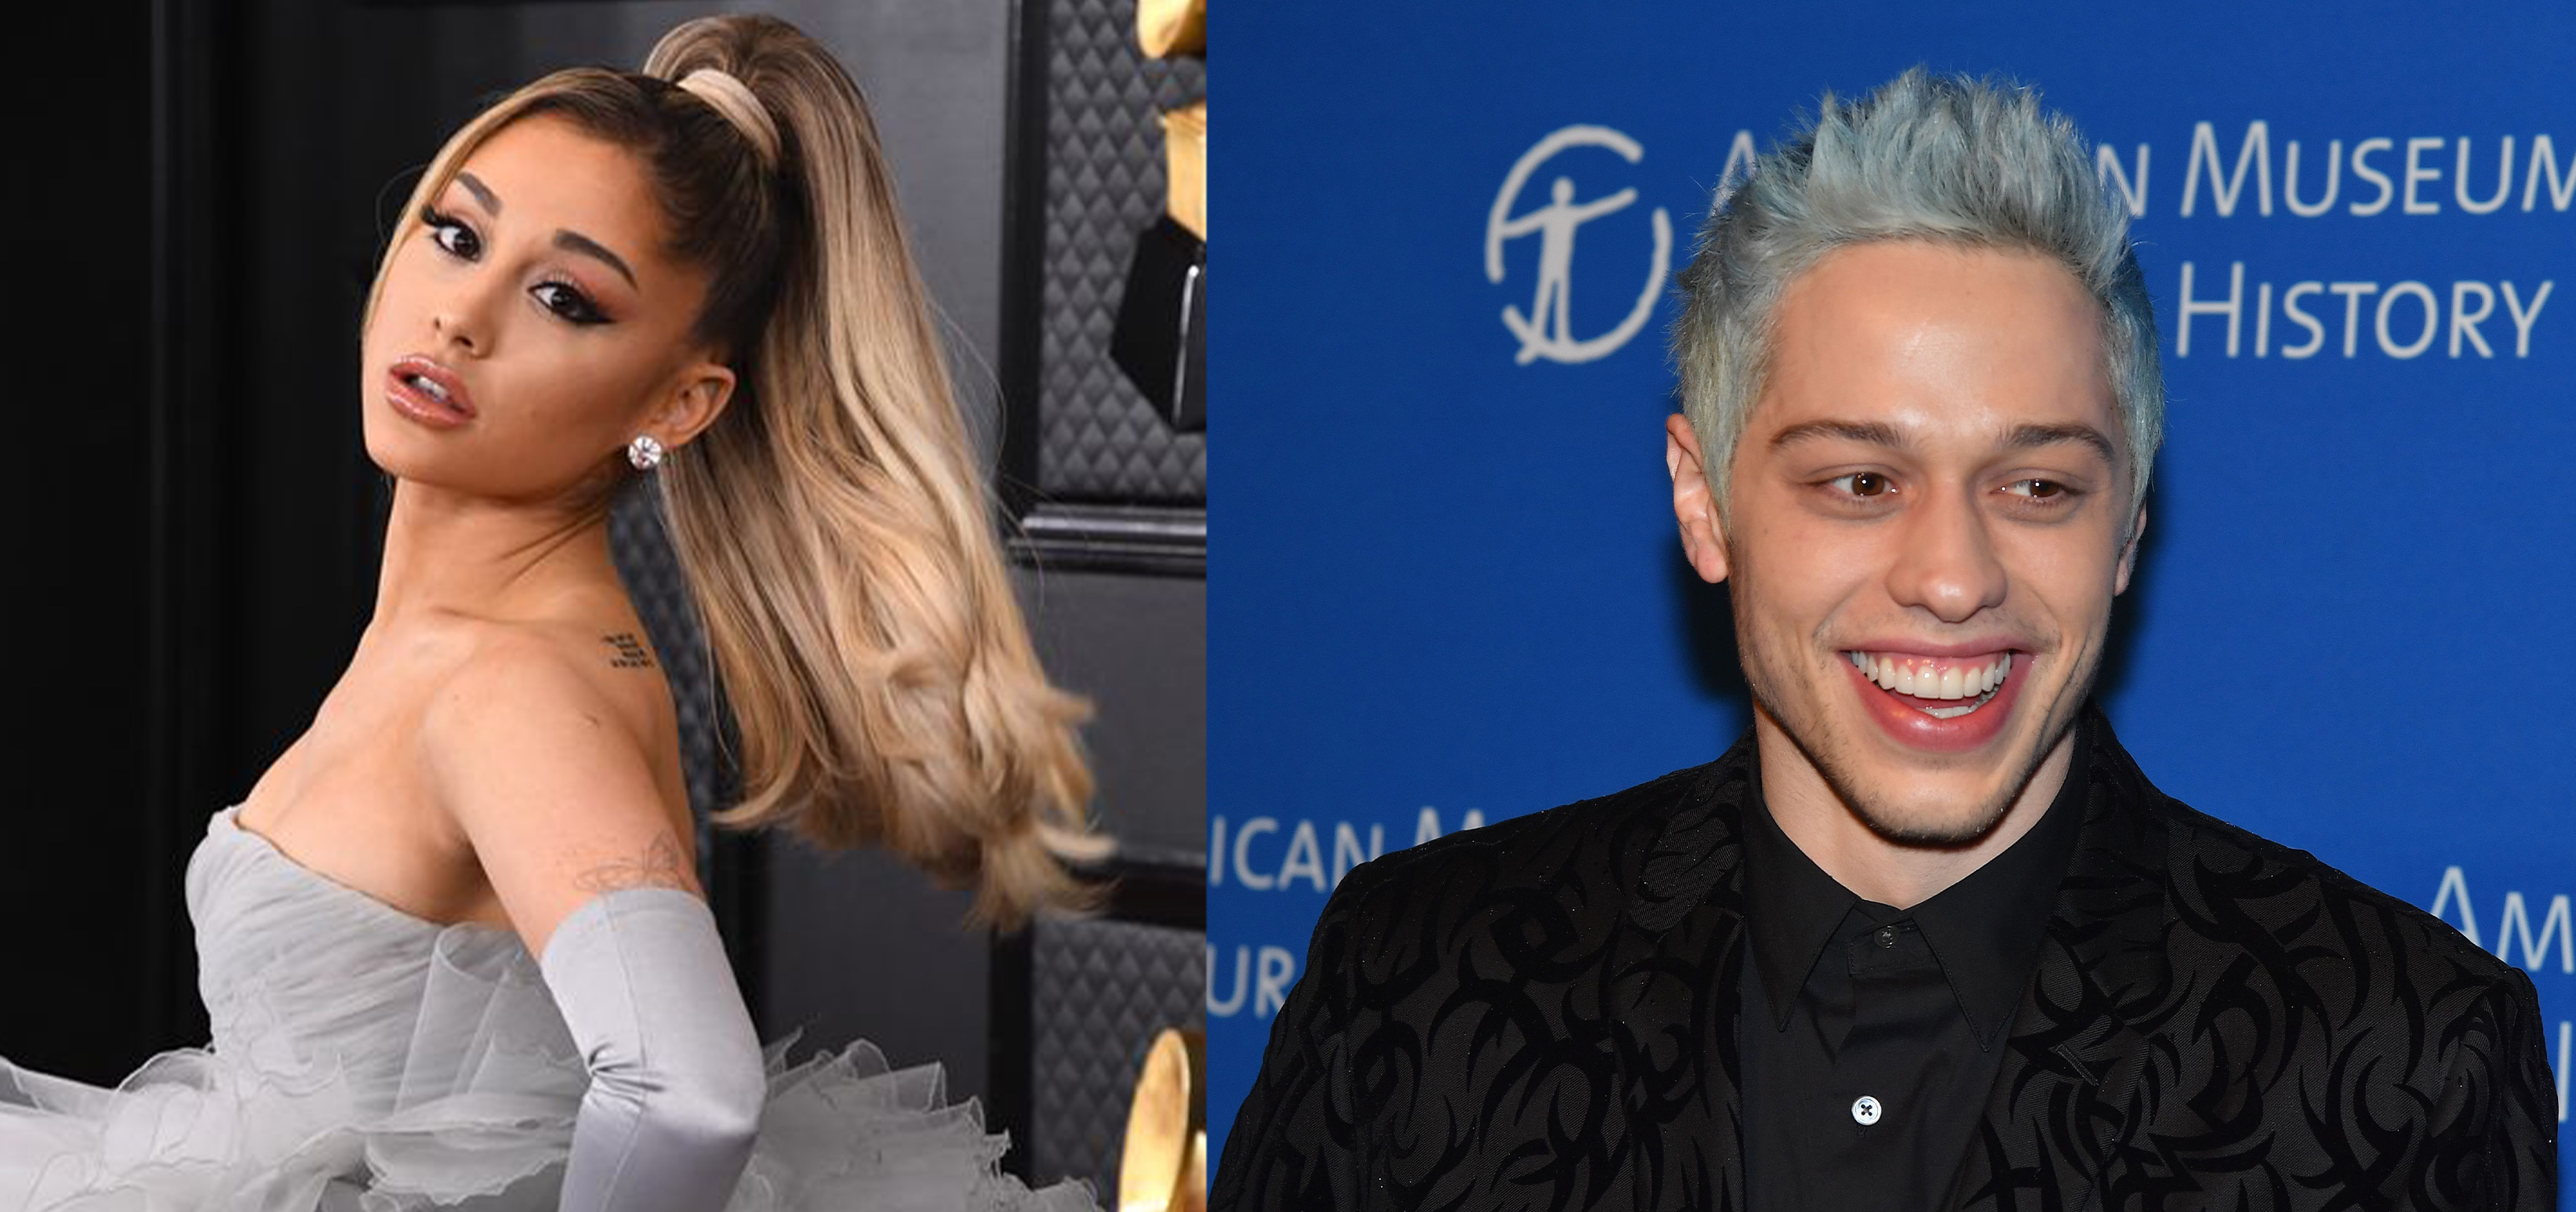 A RELATIONSHIP DISTRACTION? SNL’s Pete Davidson Responds To Ariana Grande’s Diss: You Are “Bill Board’s Woman Of The Year”, While I’m “Butt-hole Eyes From Barstoolsports.com.”